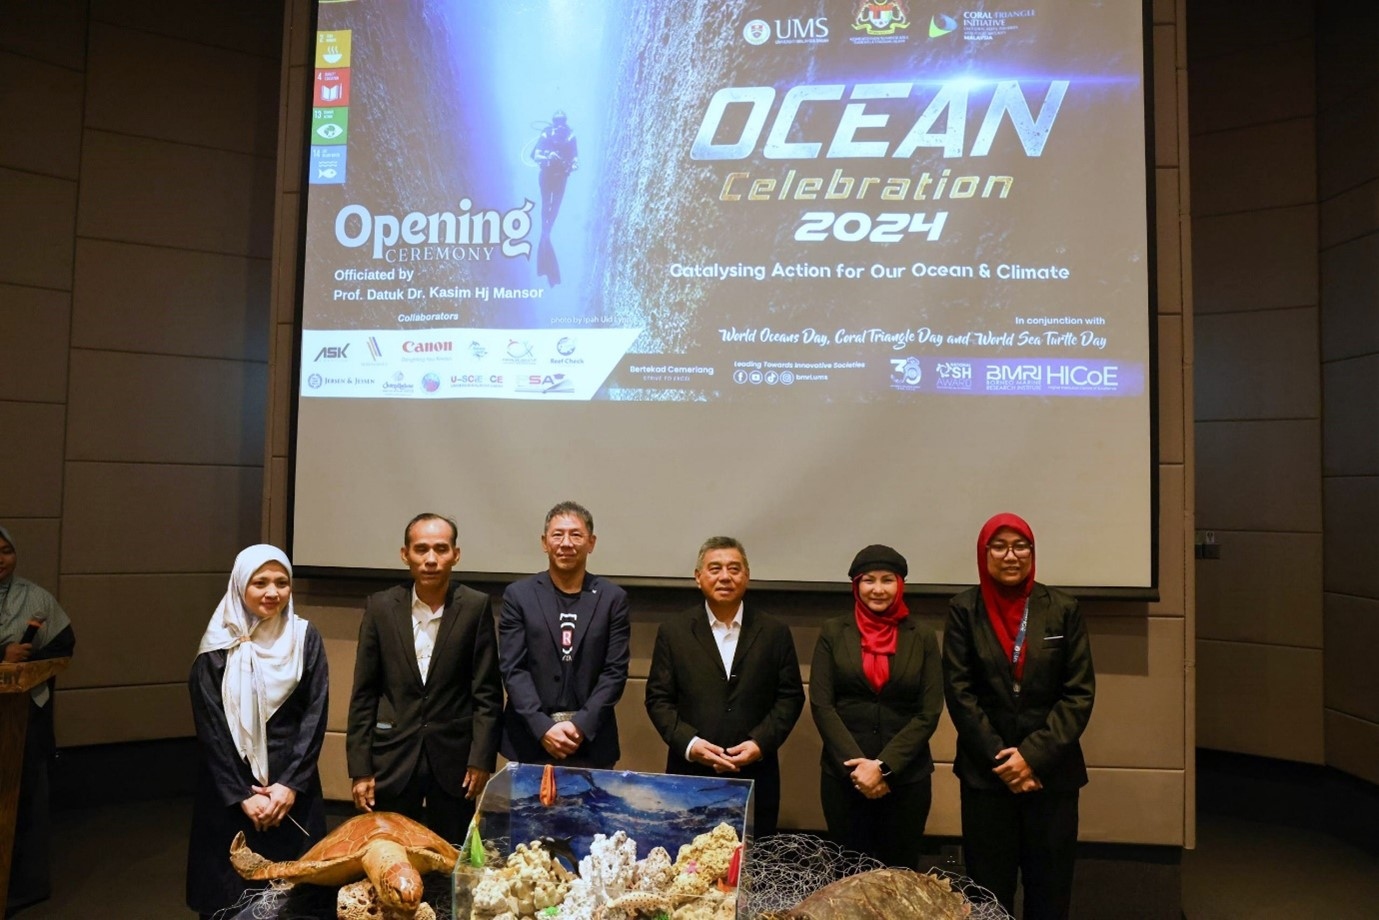 Canon Elevates Ocean Awareness Through Captivating Photography Workshop and Exhibition